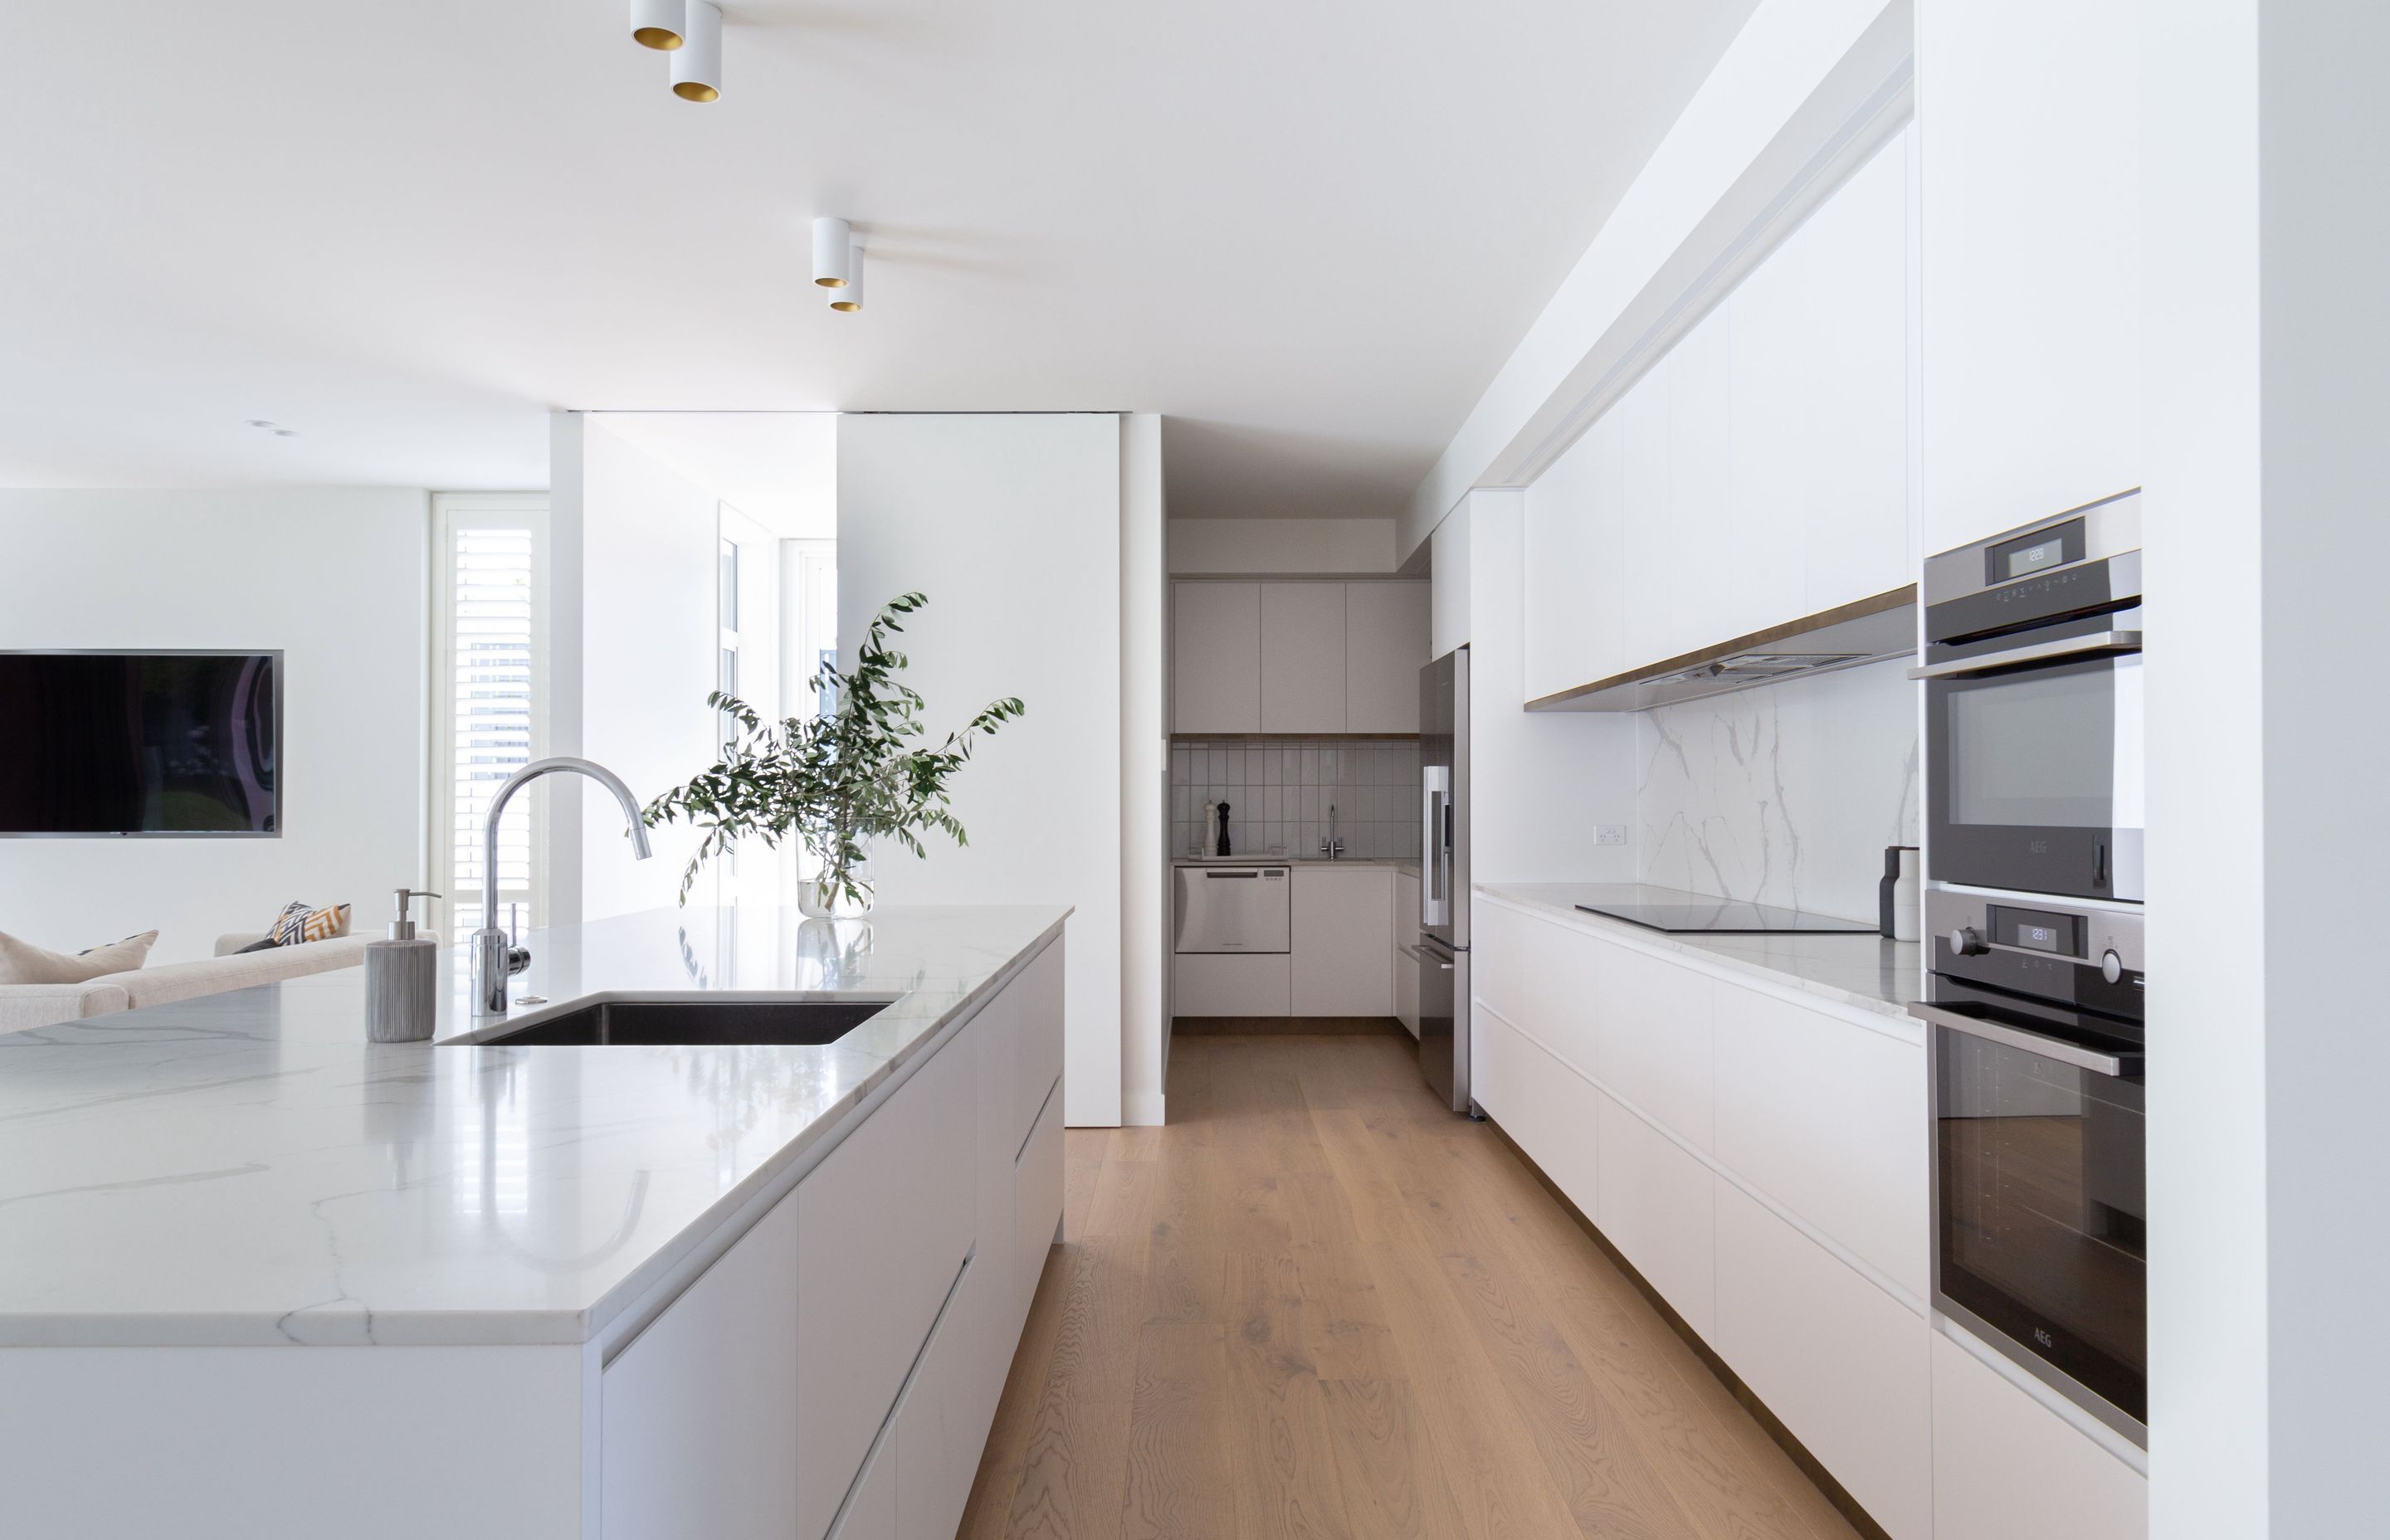 The kitchen's streamlined, white and marble materiality enhances the elegance and minimalism of the space.